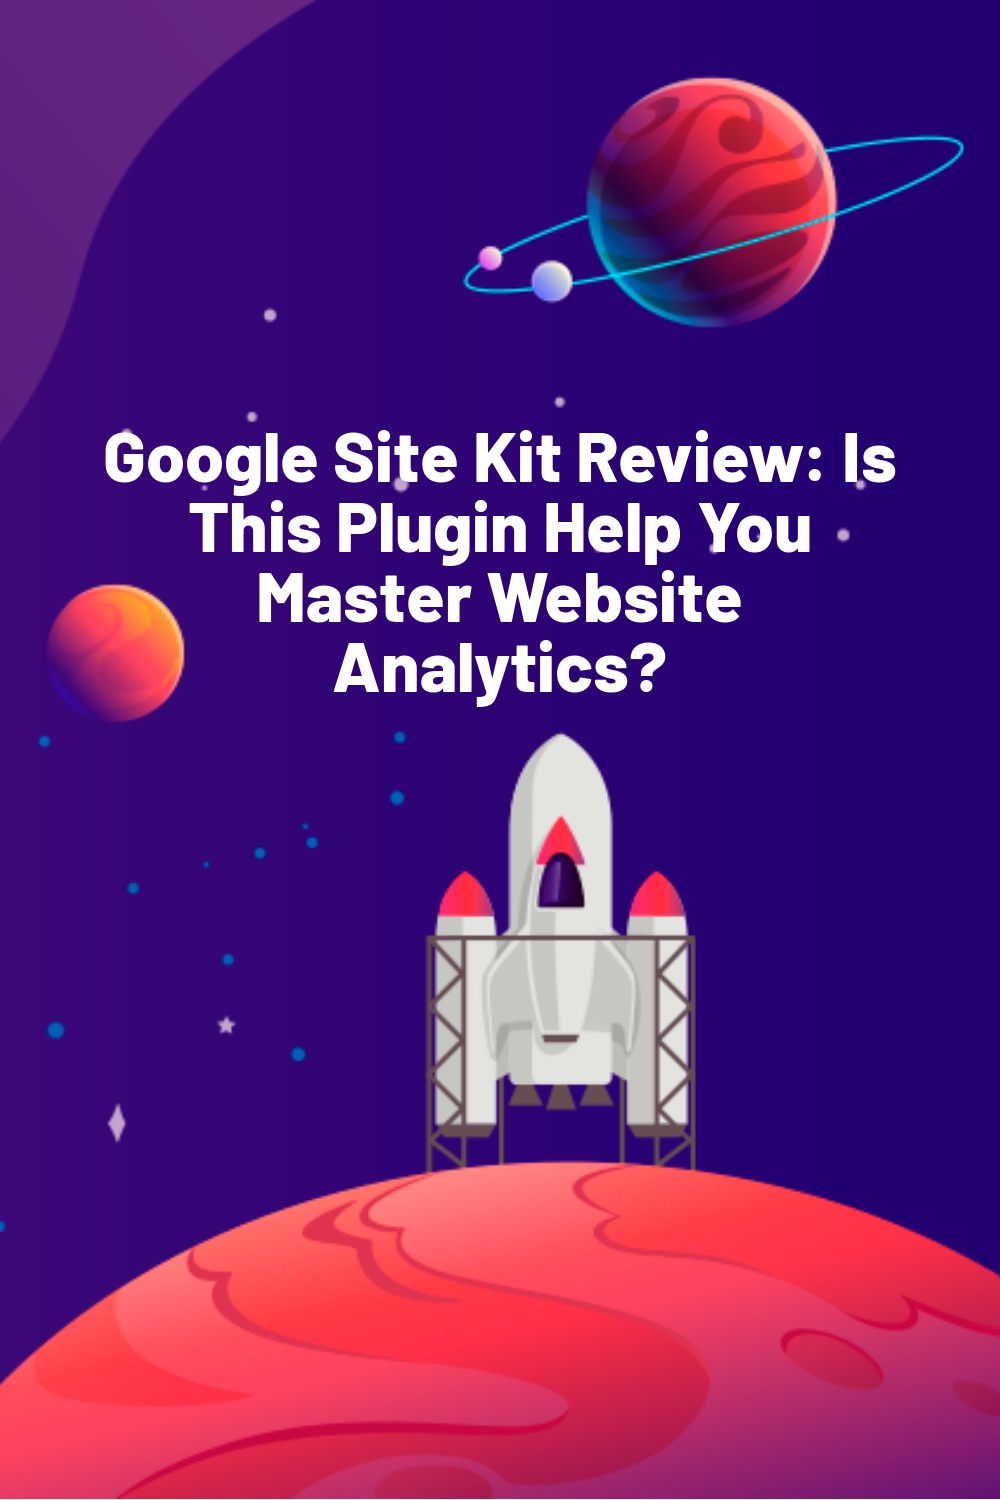 Google Site Kit Review: Is This Plugin Help You Master Website Analytics?